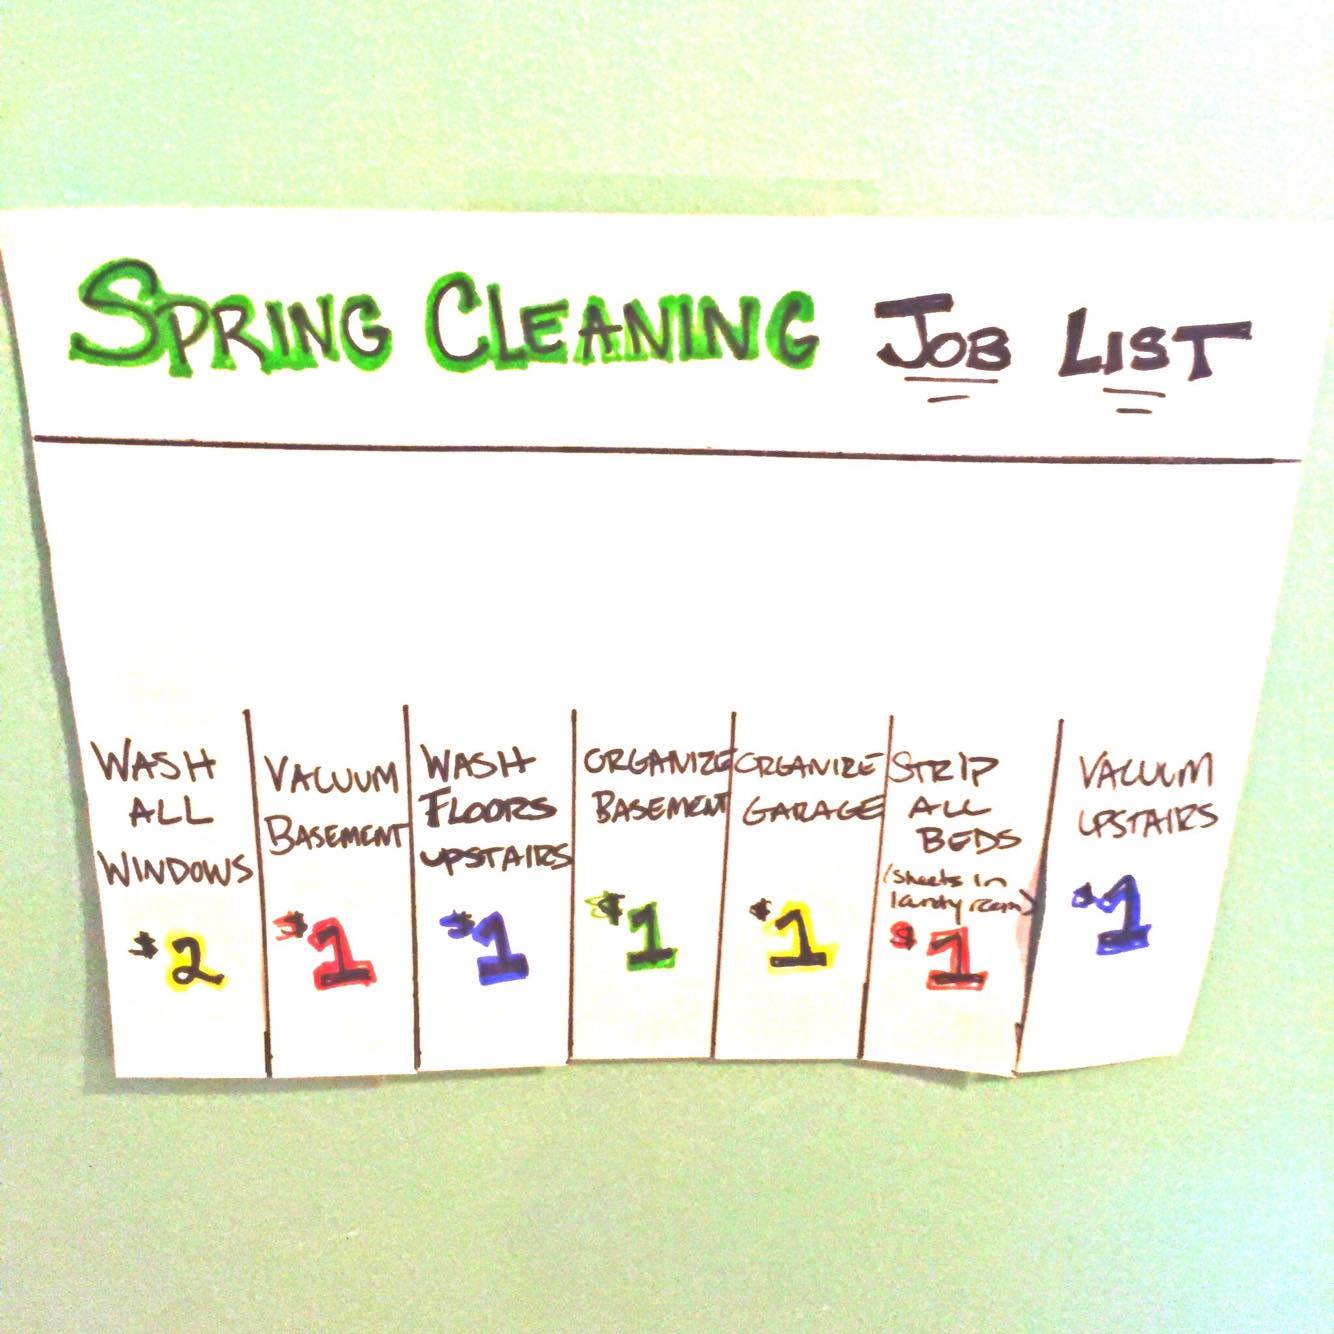 Tips for spring cleaning with kids